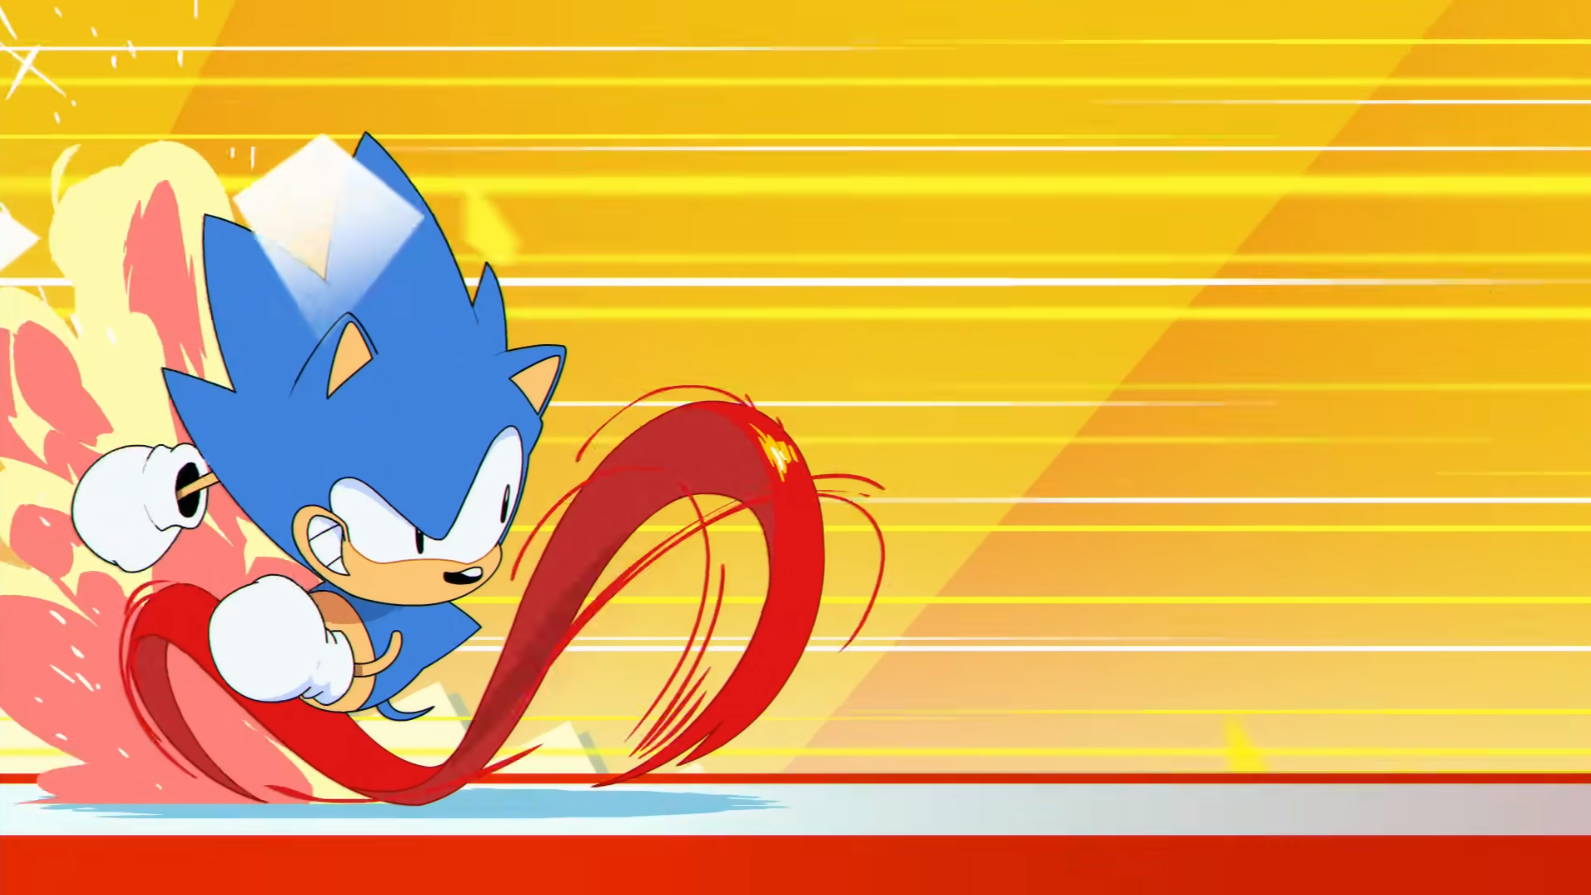 https://static.wikia.nocookie.net/maniaadventures/images/b/b2/Sonicrun.png/revision/latest?cb=20210305202020